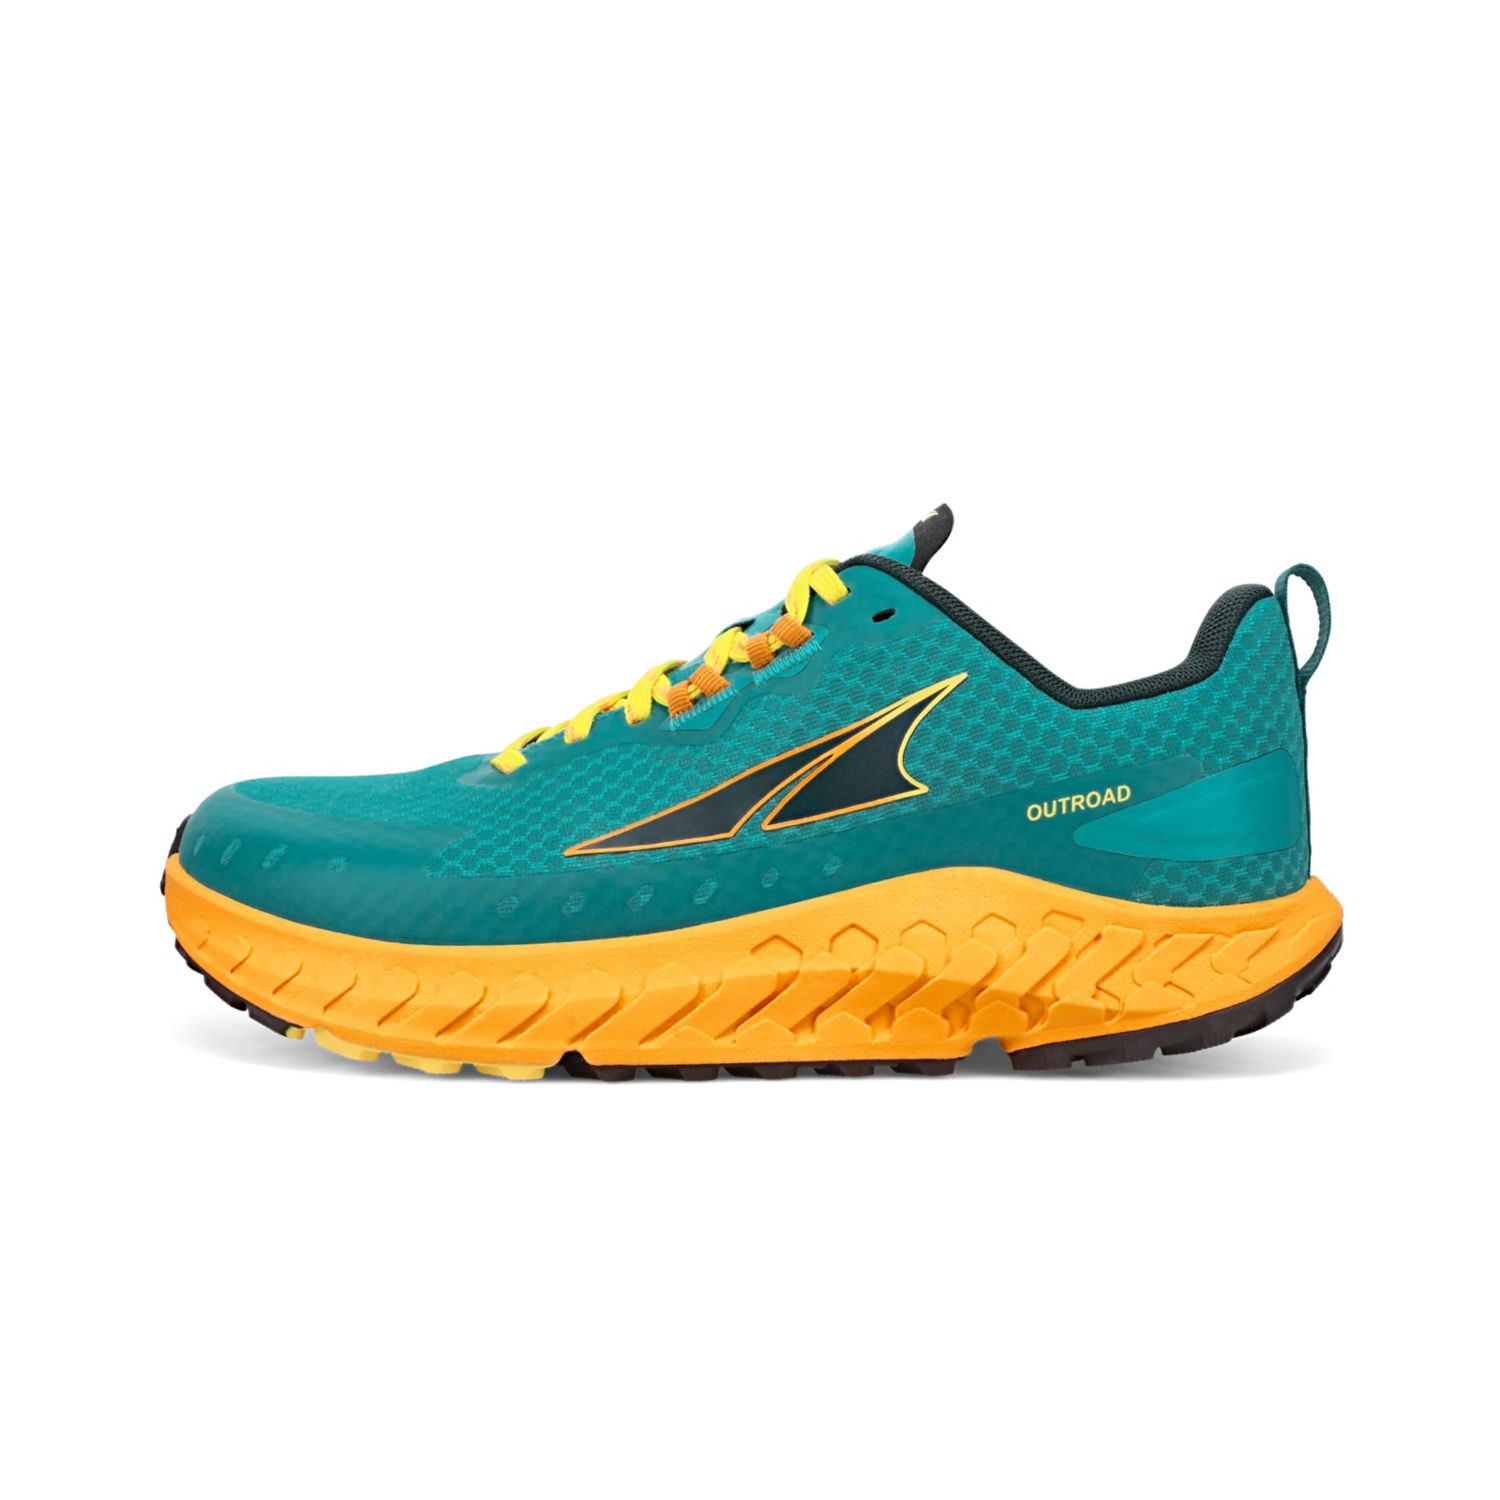 Turquoise / Yellow Altra Outroad Women's Trail Running Shoes | Ireland-74651209